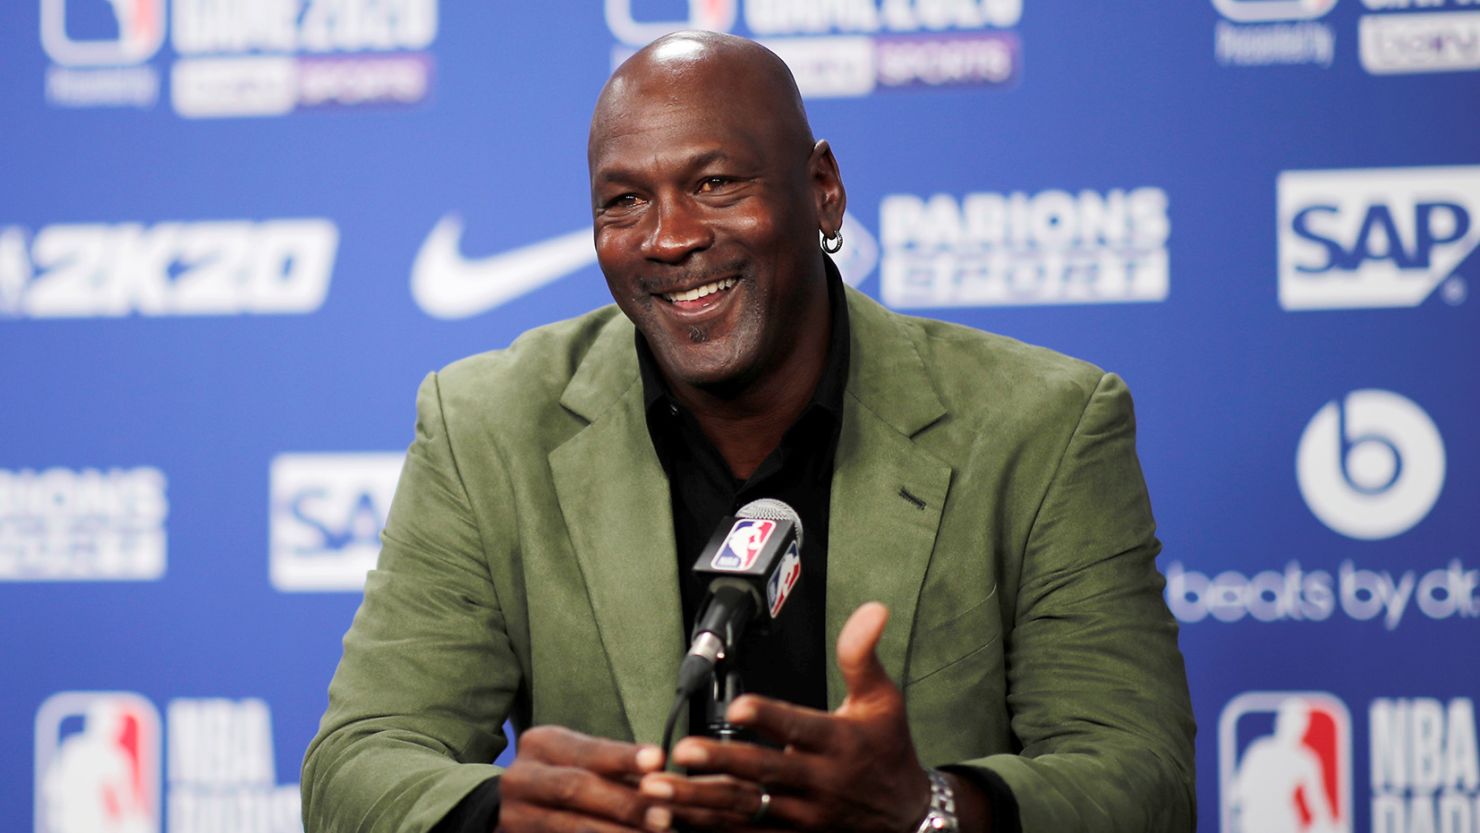 Michael Jordan becomes first athlete to rank among America's 400 wealthiest  people, according to Forbes